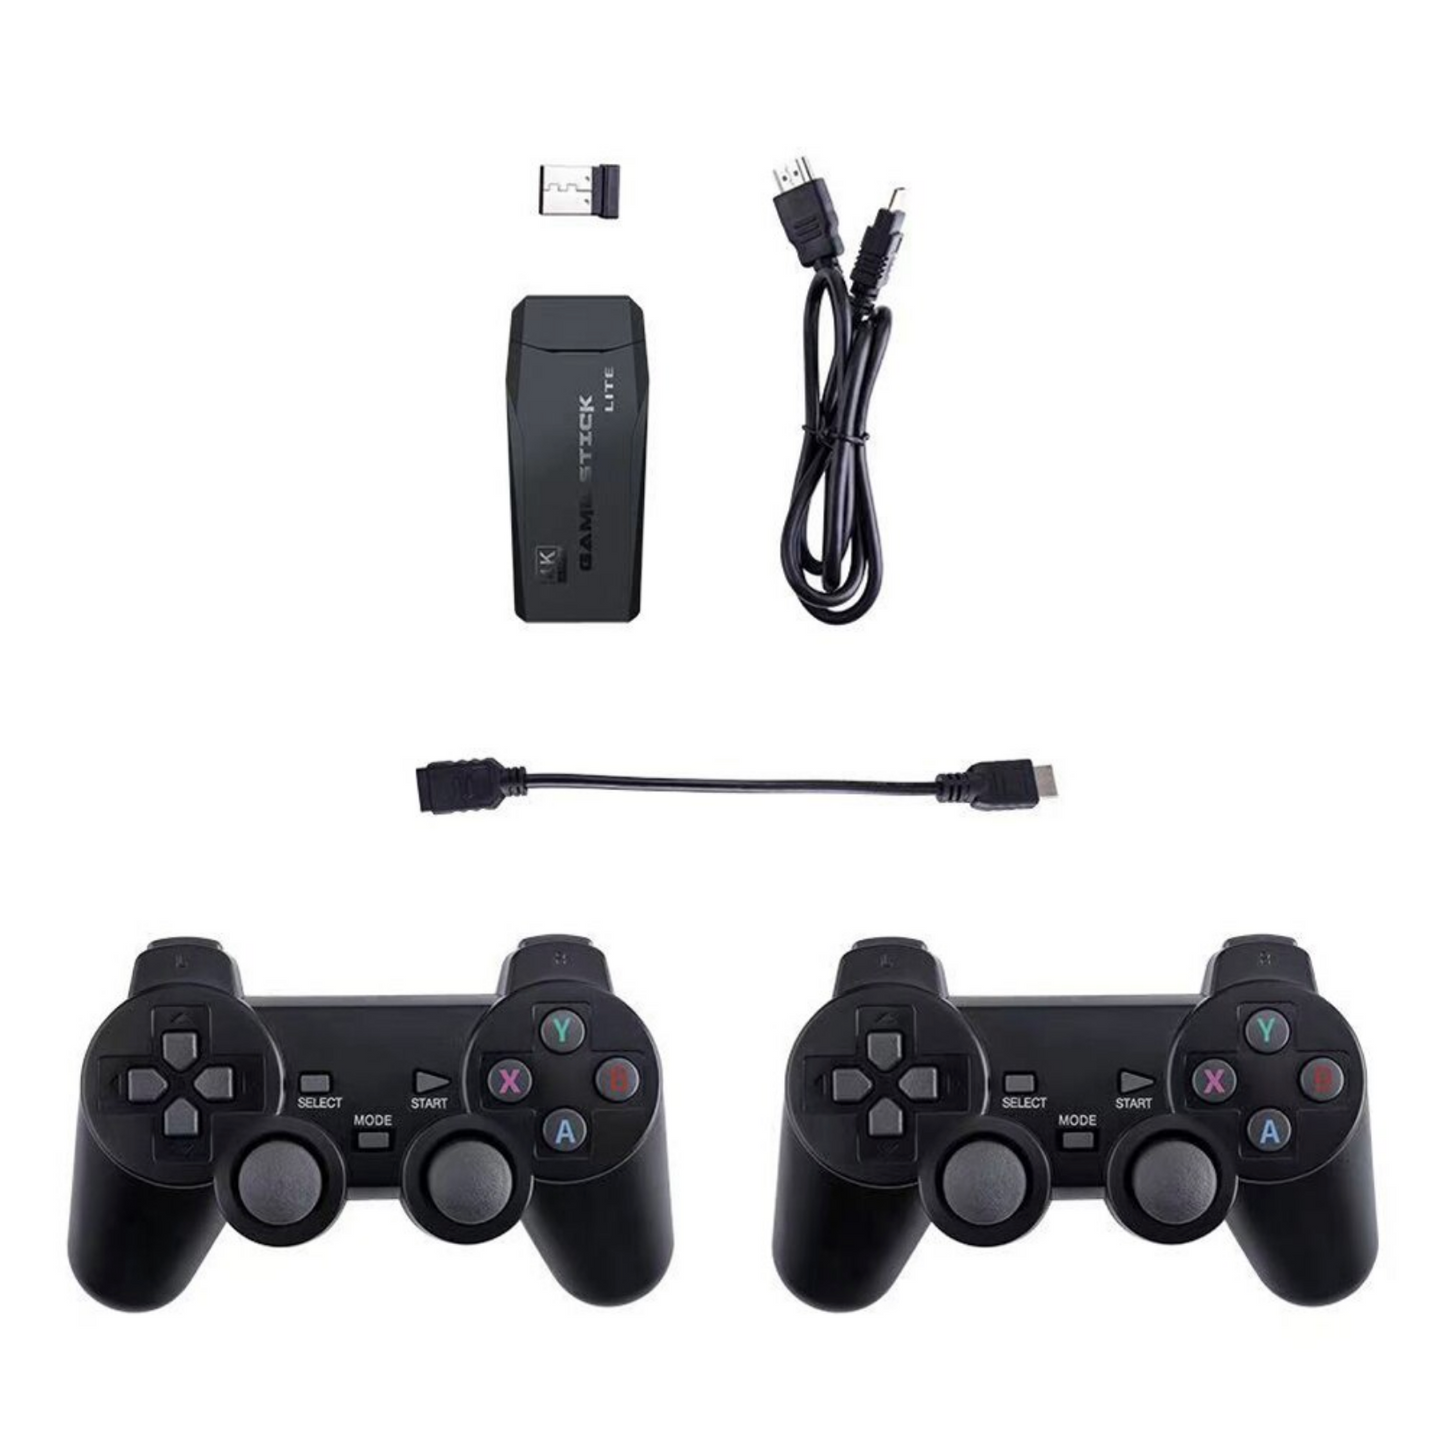 4K HD HDMI 2.4G Wireless Controllers Gamepad Stick Console With 3535 Retro Classic Games